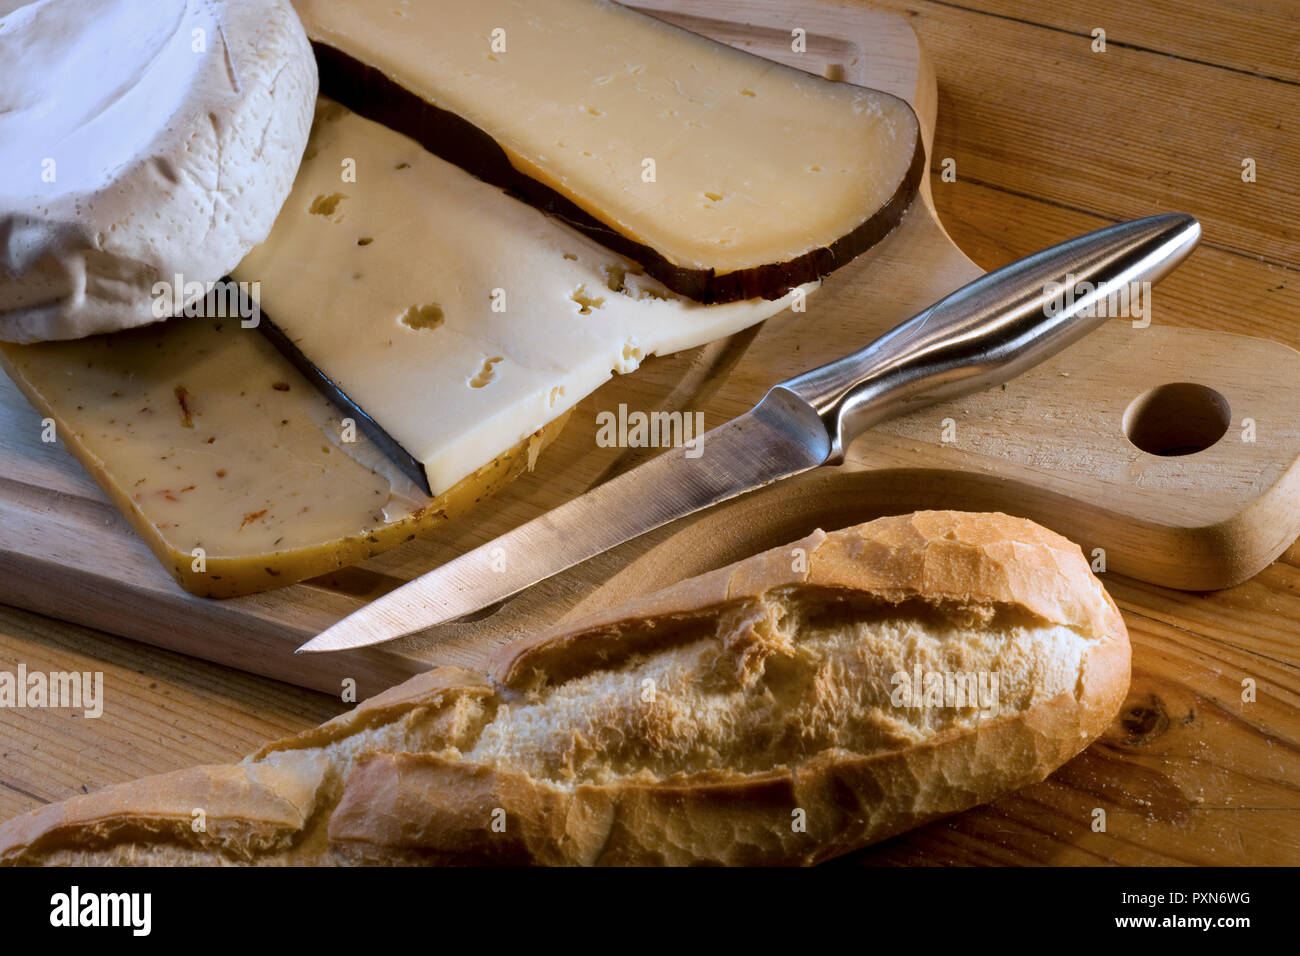 Beauvoorde, Belgian semi-hard cheese made from cow's milk, from the village of Beauvoorde in West Flanders, Belgium Stock Photo